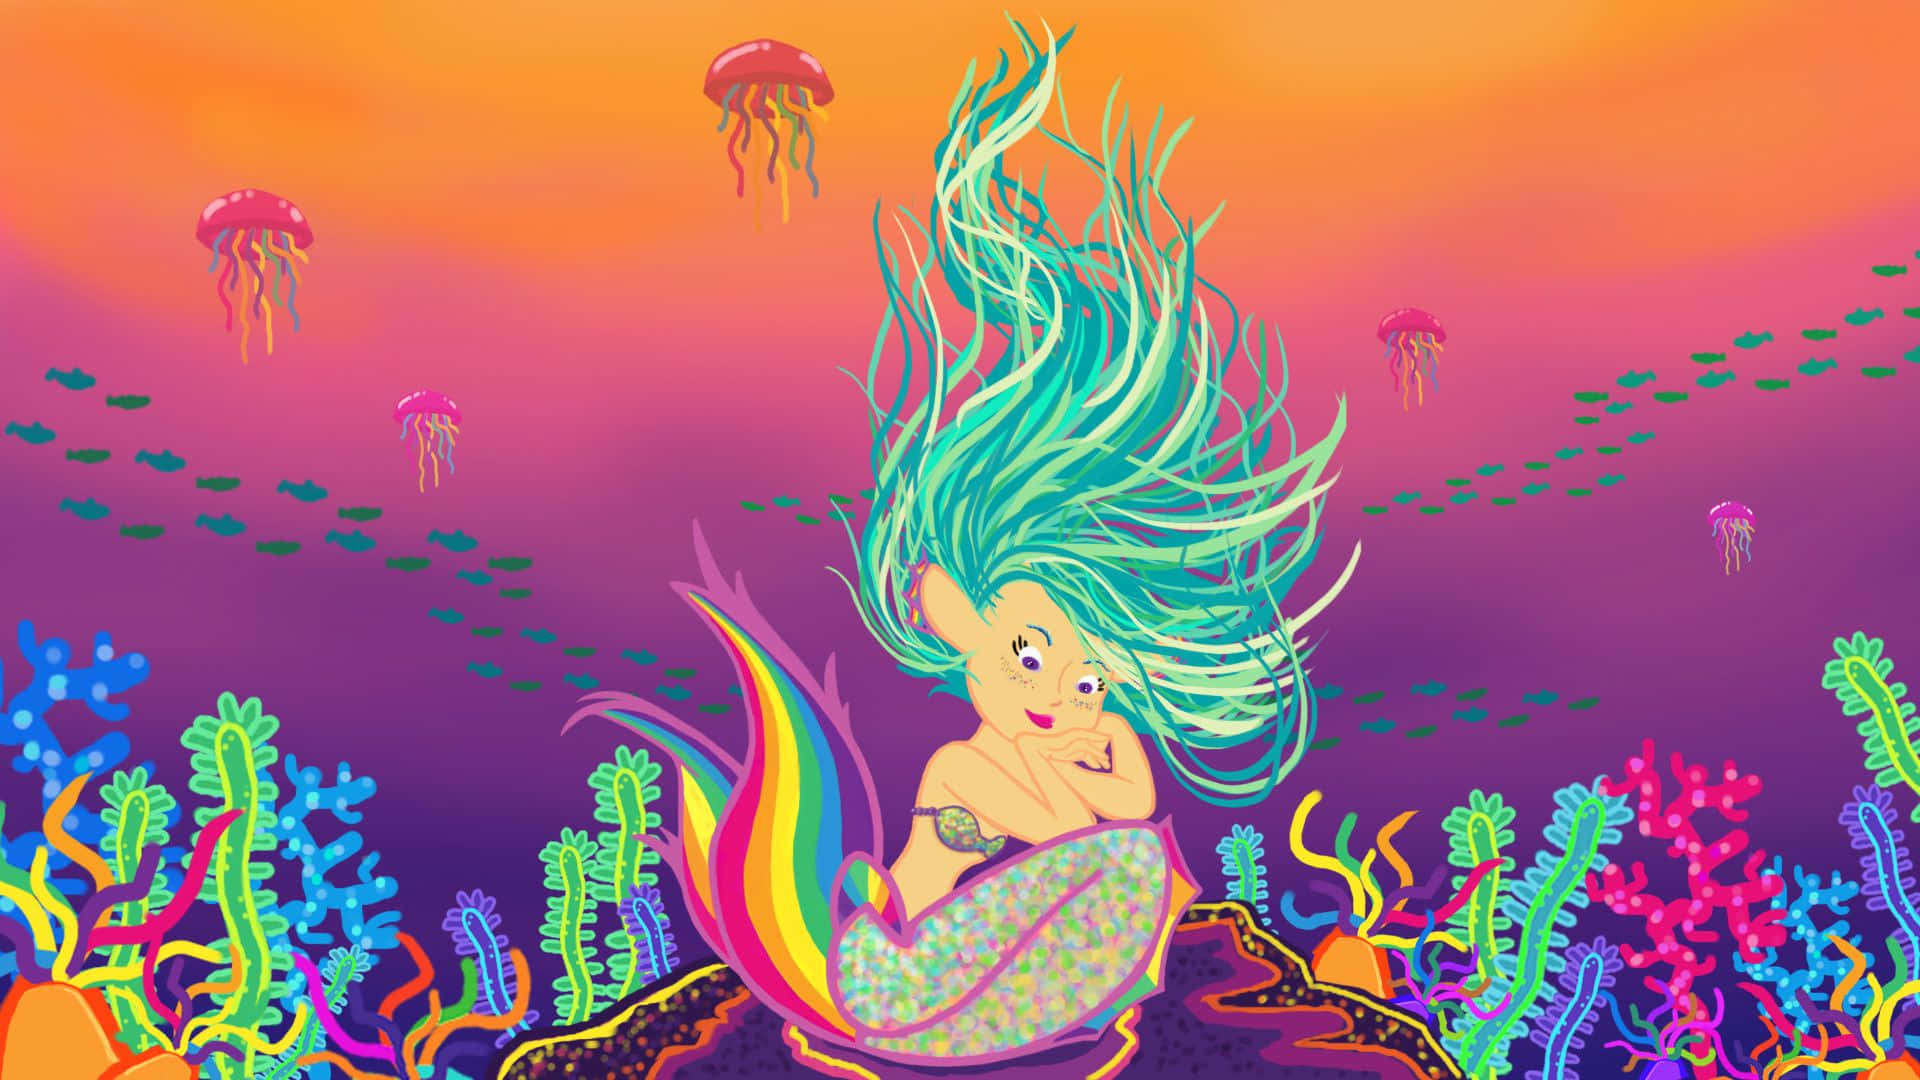 A Mermaid With Colorful Hair Sitting On A Coral Reef